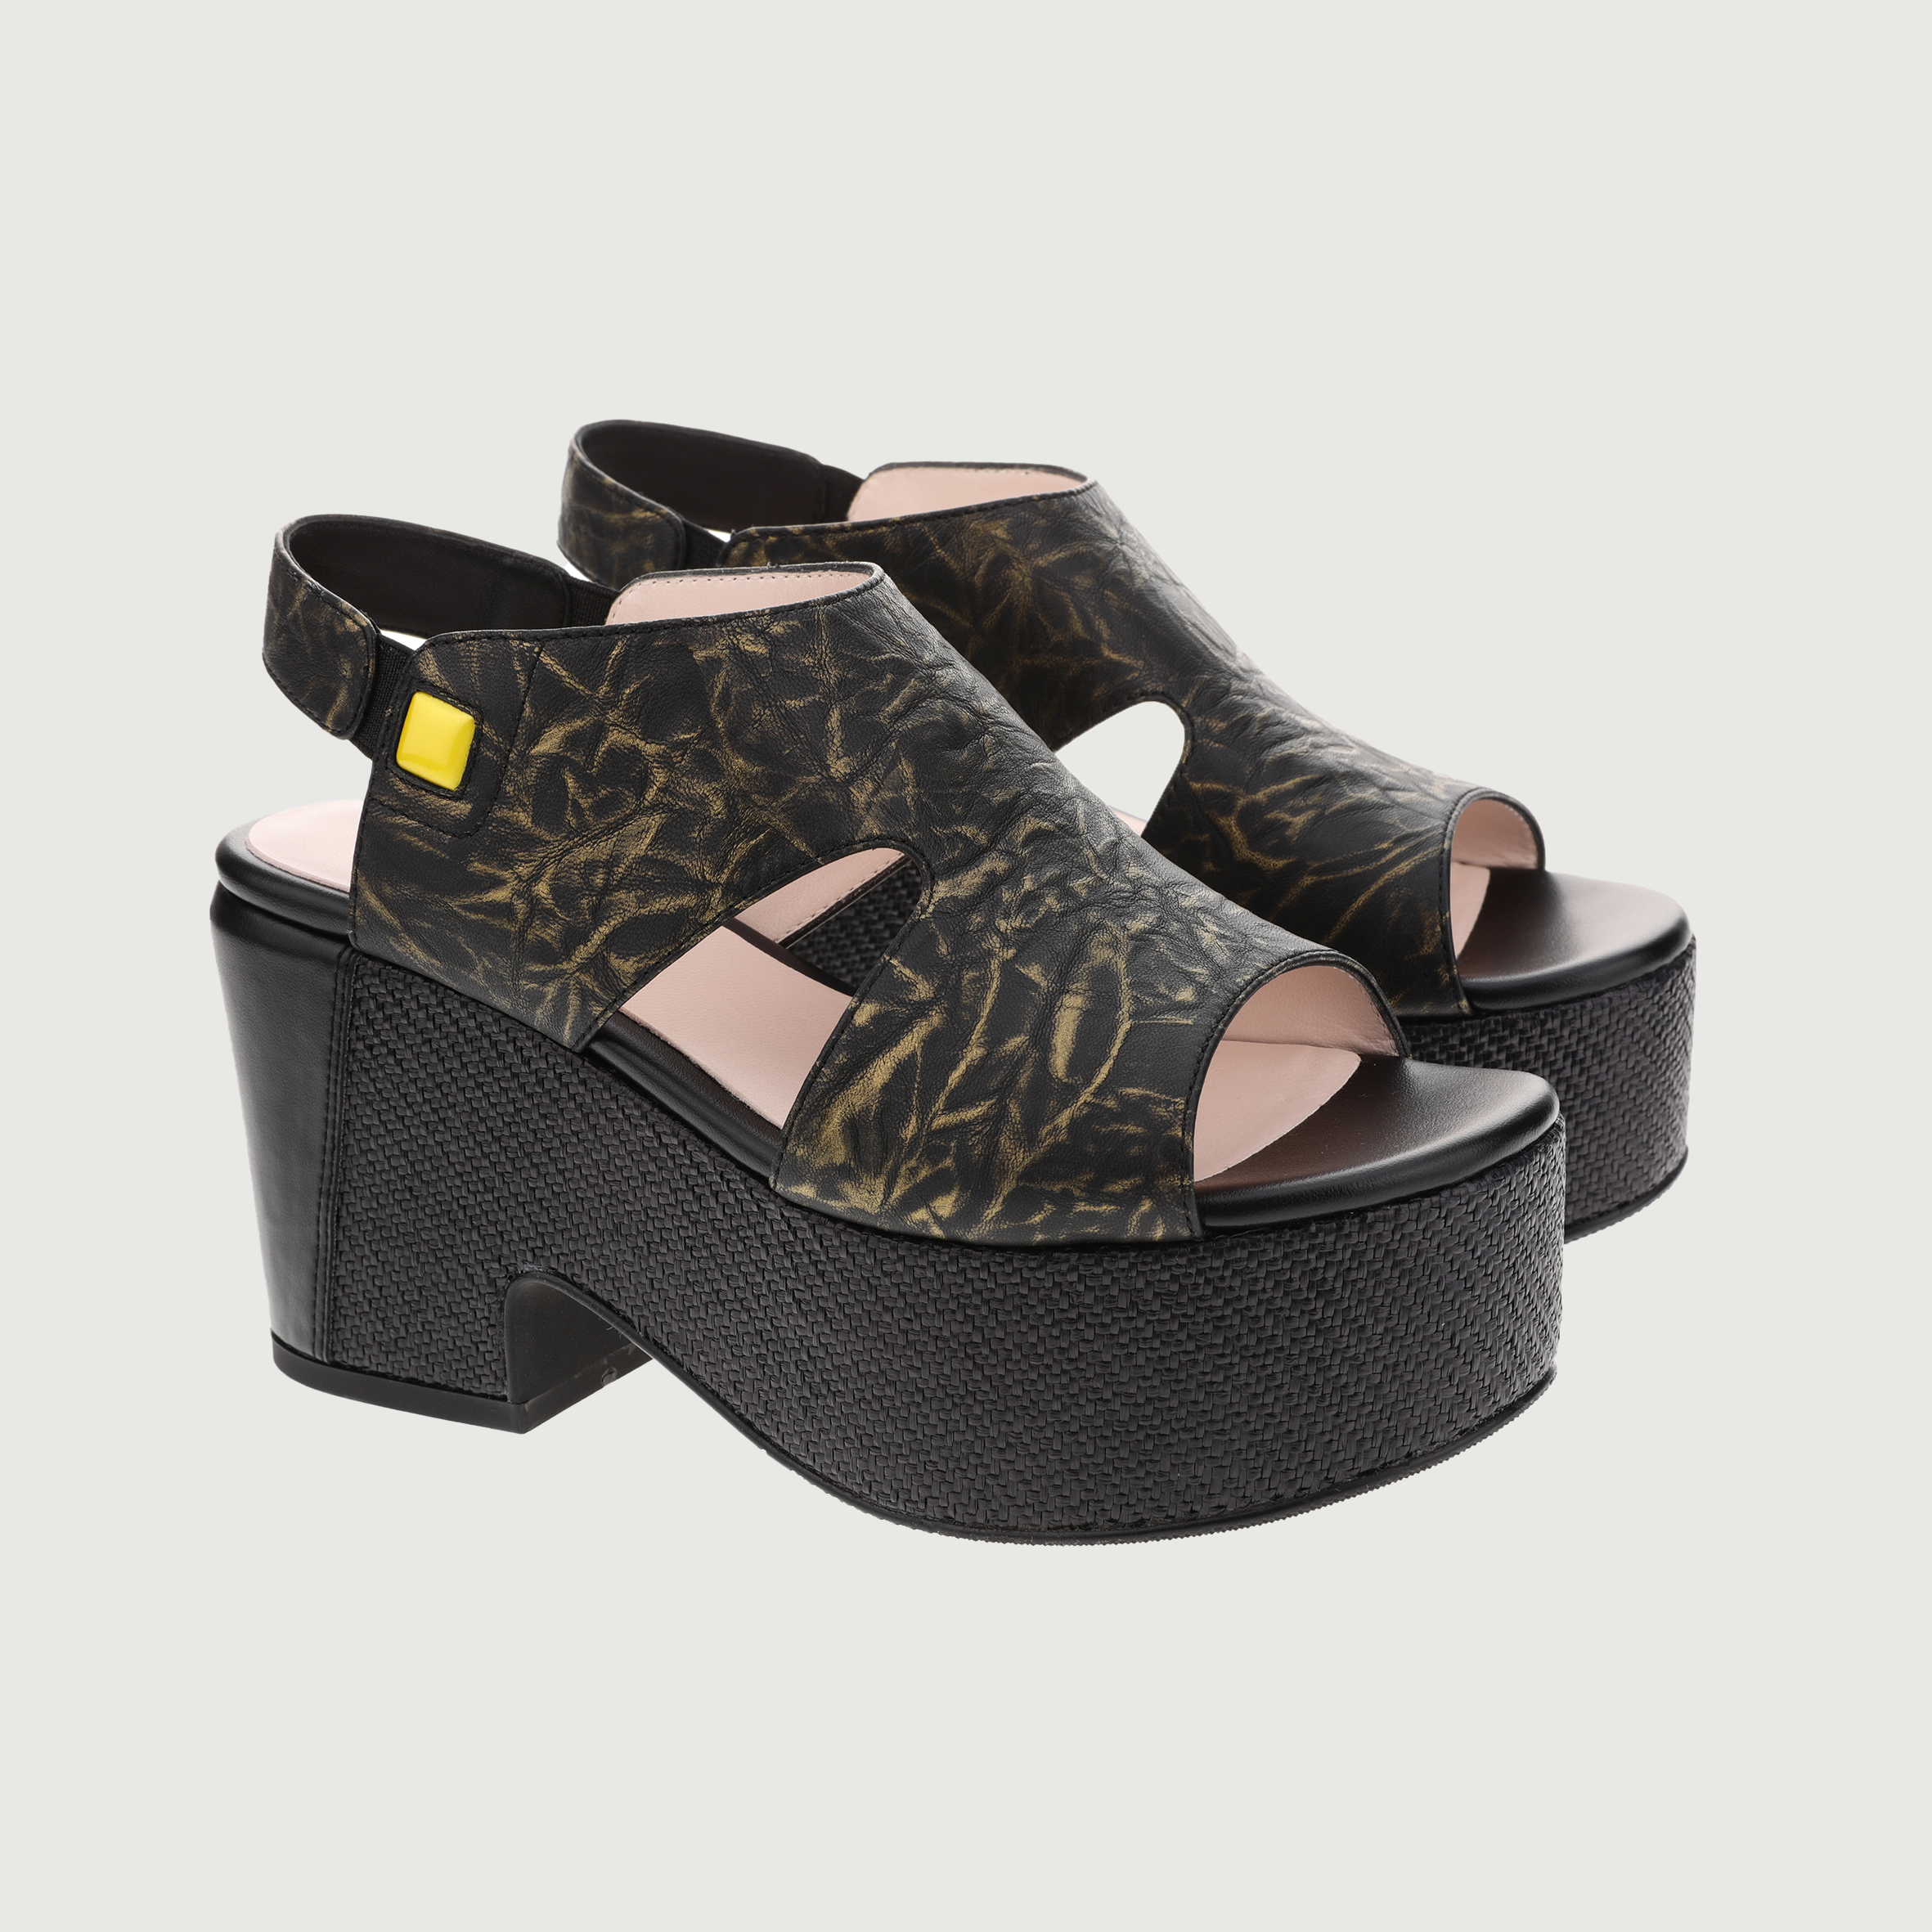 Hand-gripped black and gold Sandal